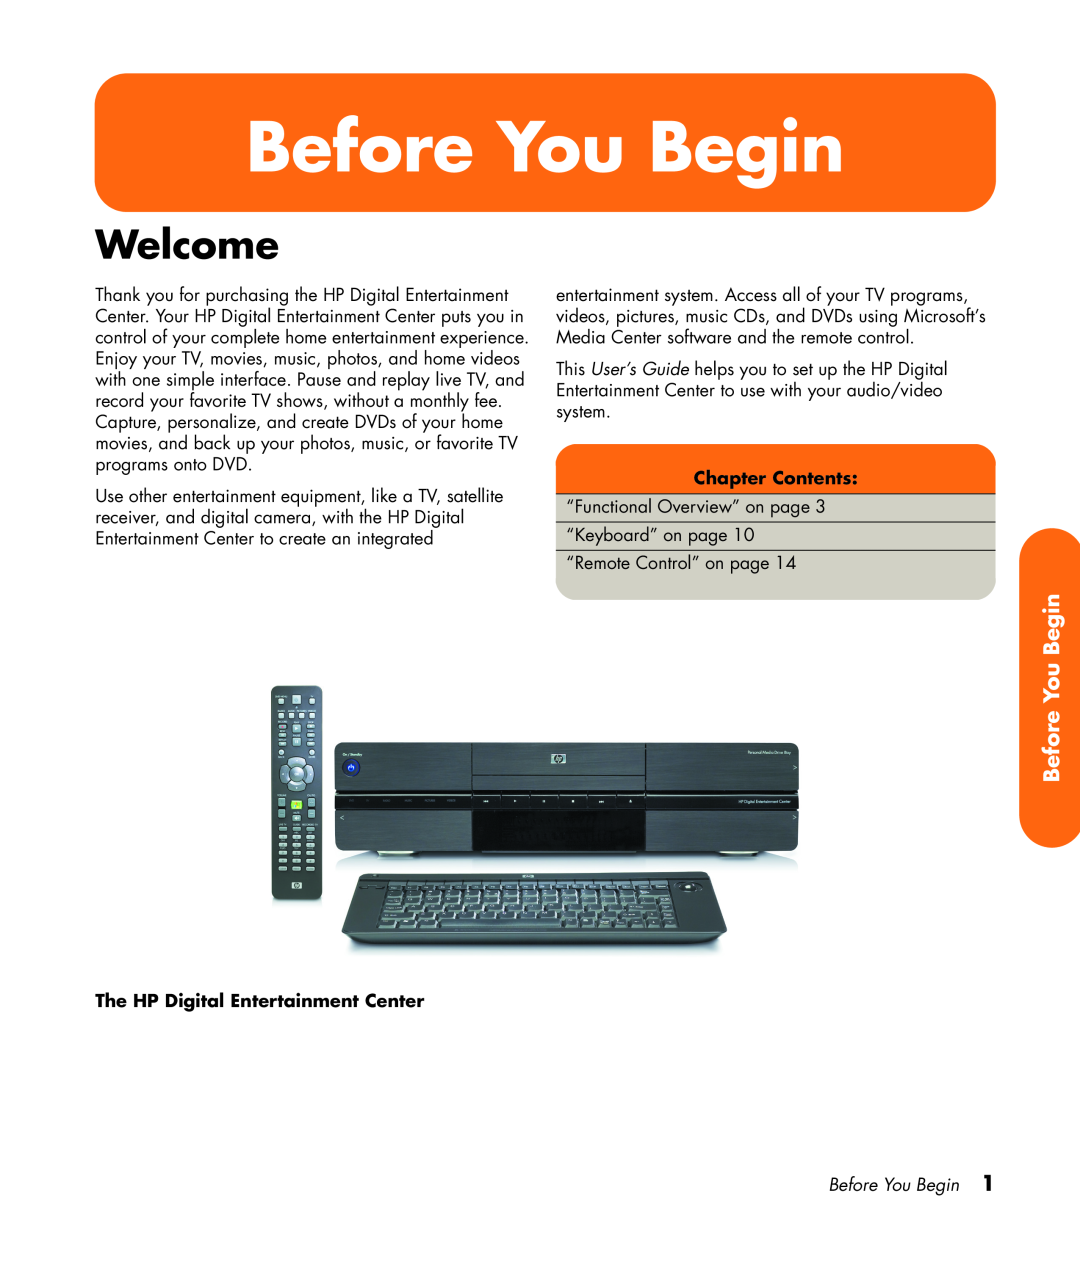 HP z552, z557, z555, z545, z540 manual Before You Begin, Welcome, Chapter Contents, The HP Digital Entertainment Center 